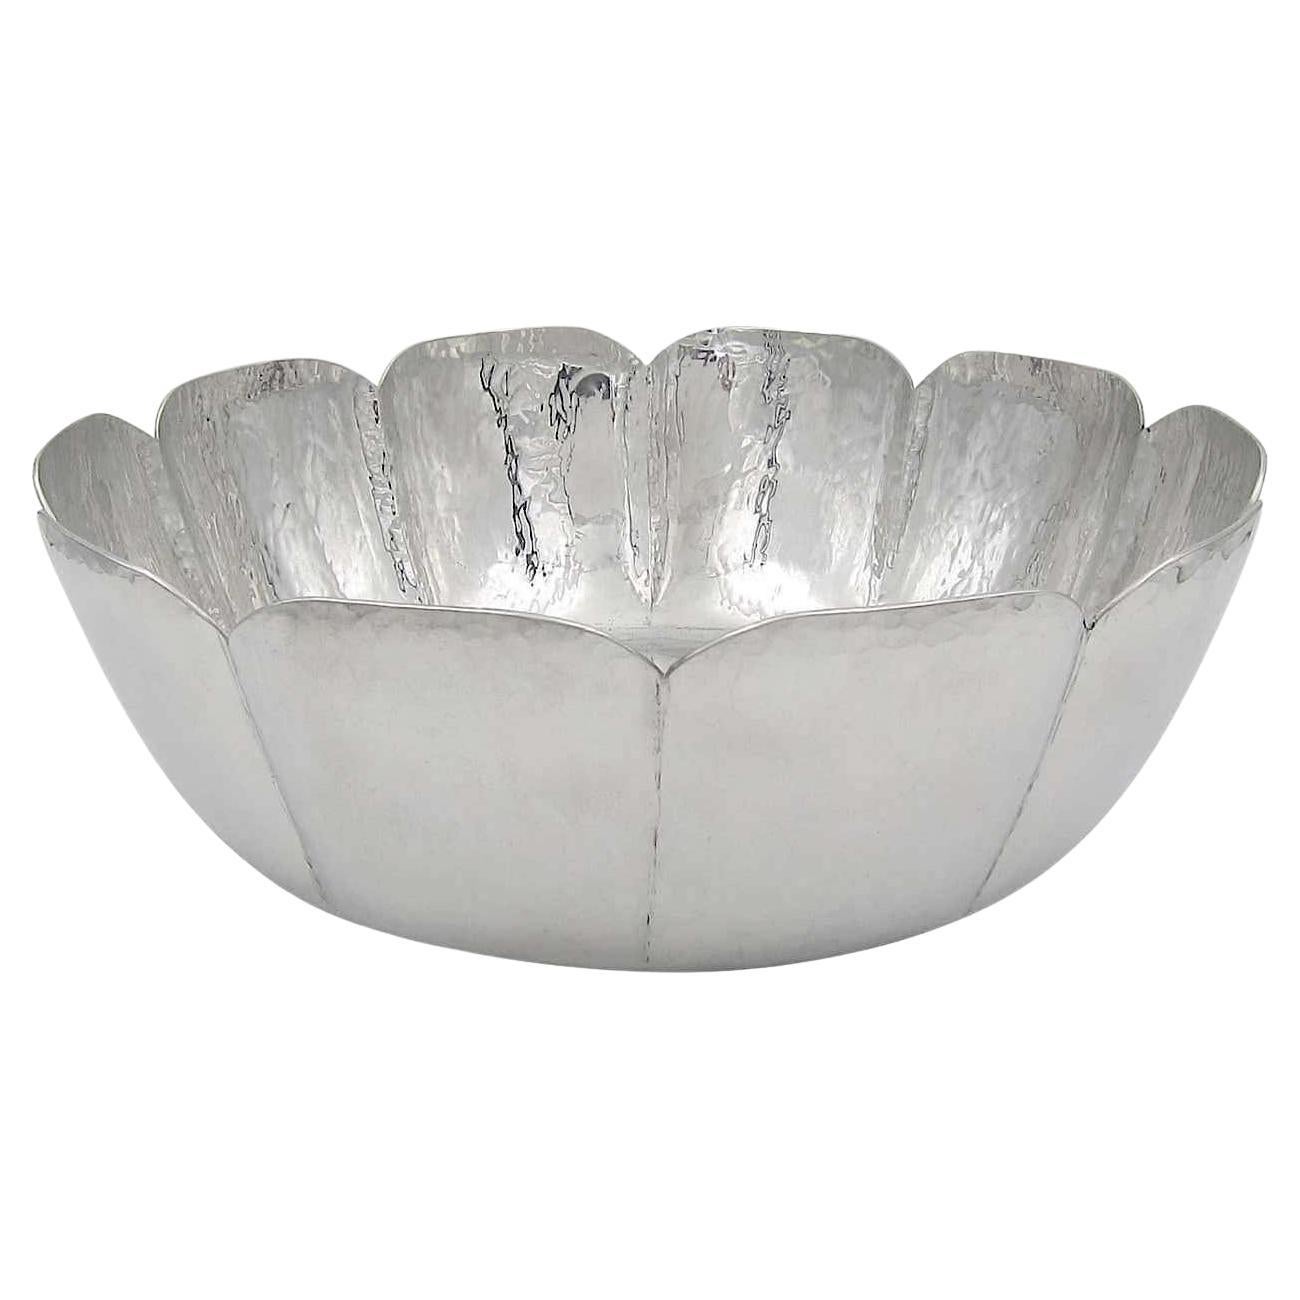 Large Cartier Bowl in Hammered and Highly Polished Pewter